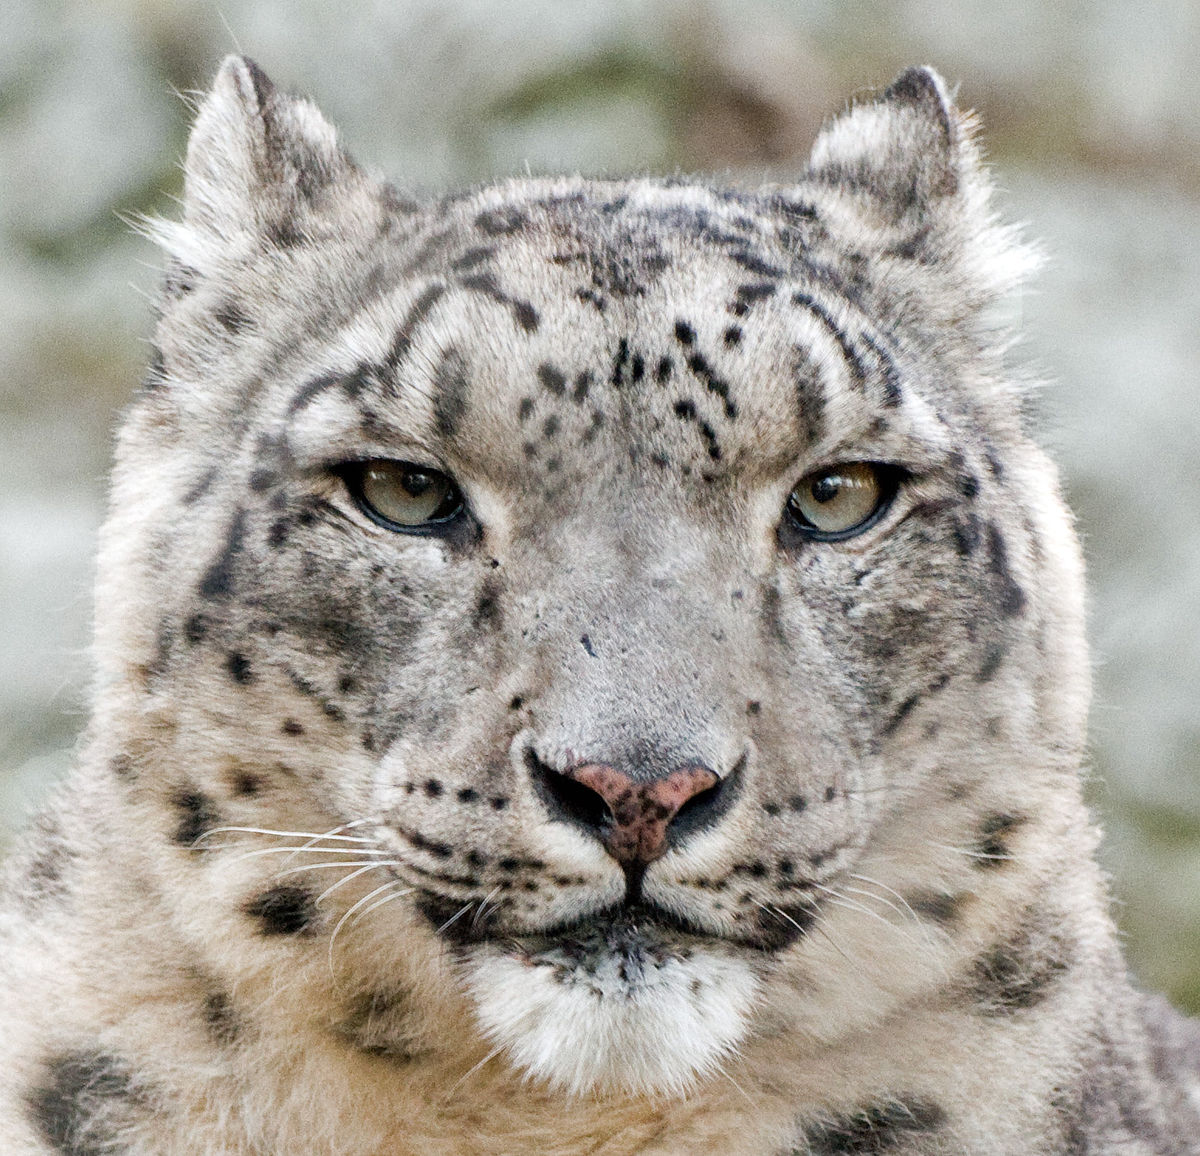 File:Snow Leopard Relaxed head.jpg - Wikimedia Commons